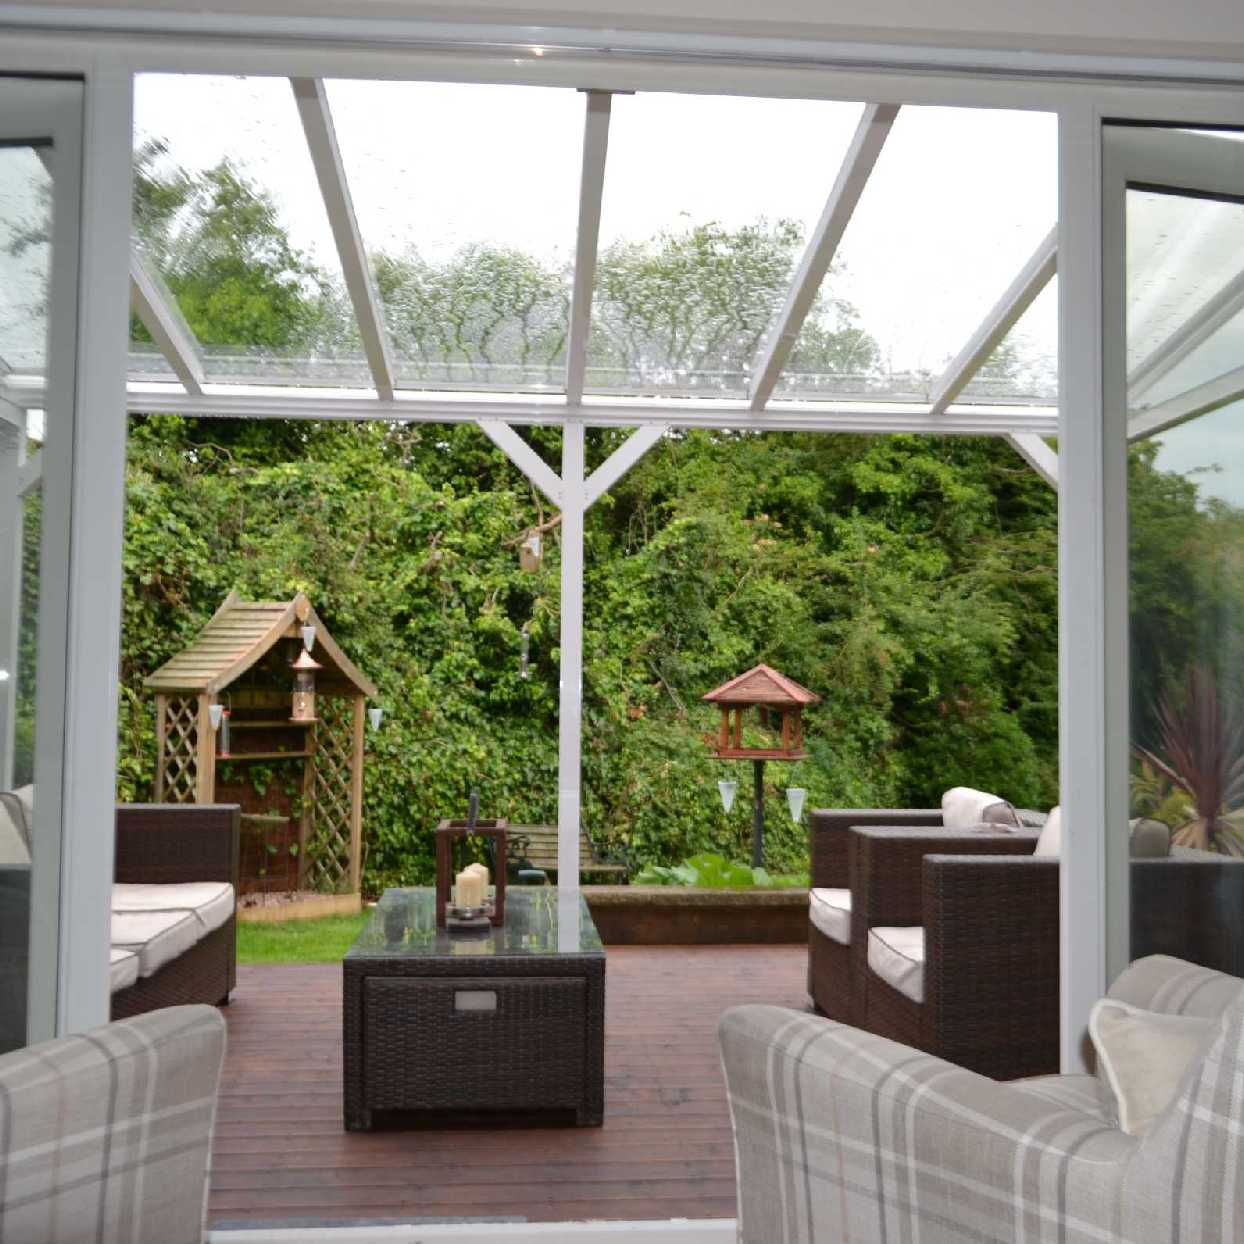 Buy Omega Smart Free-Standing, White MonoPitch Roof Canopy with 6mm Glass Clear Plate Polycarbonate Glazing - 4.9m (W) x 3.0m (P), (6) Supporting Posts online today